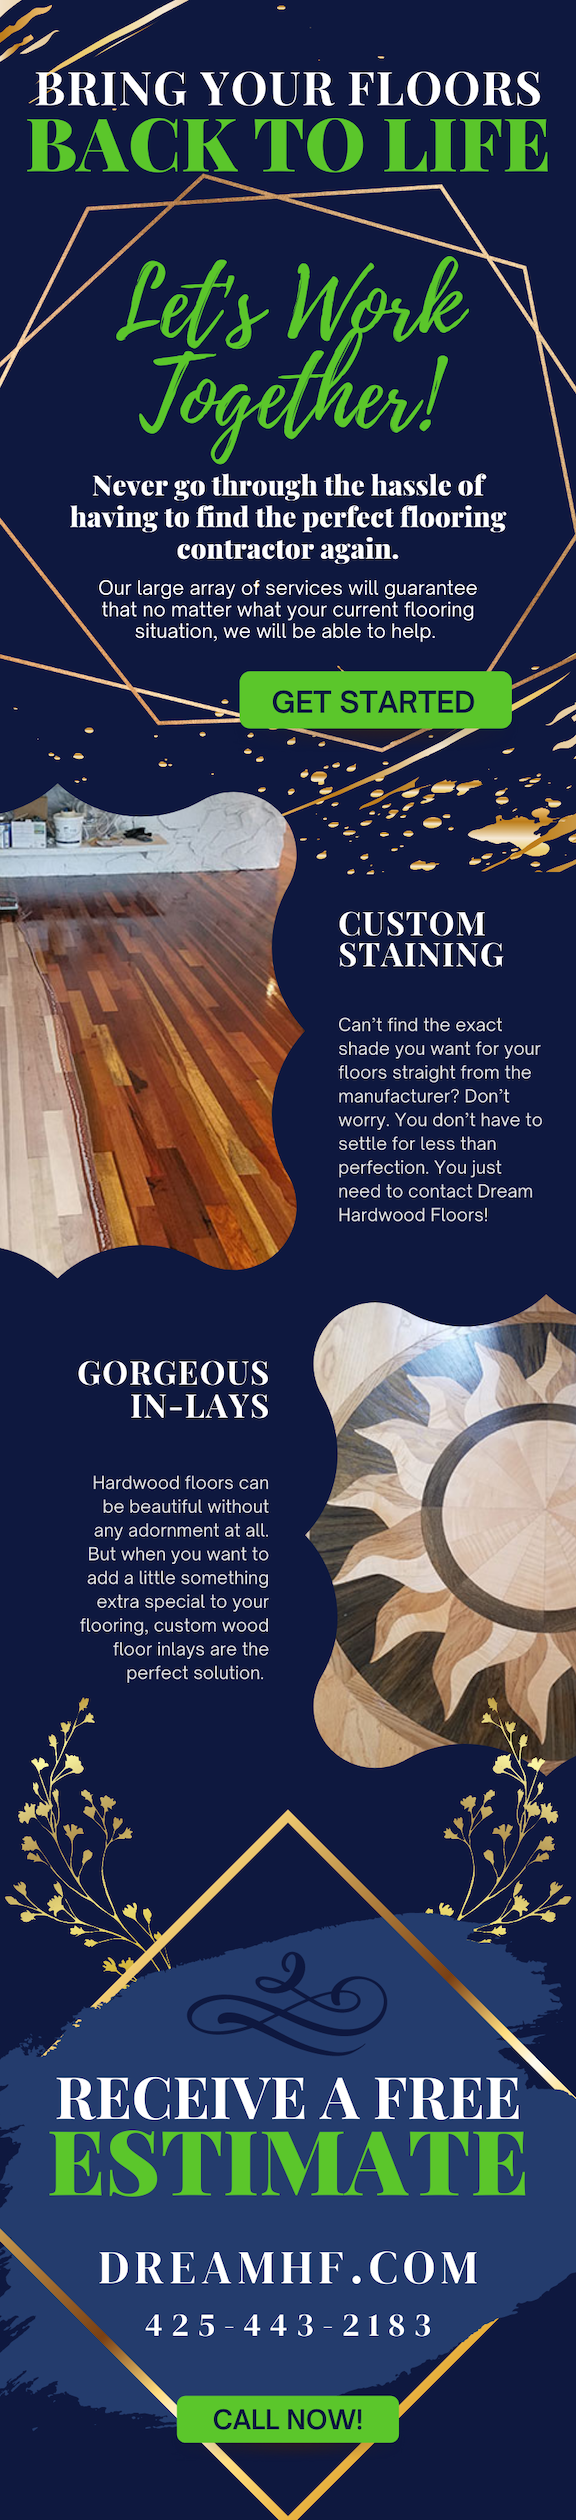 Bring Your Floors Back To Life!